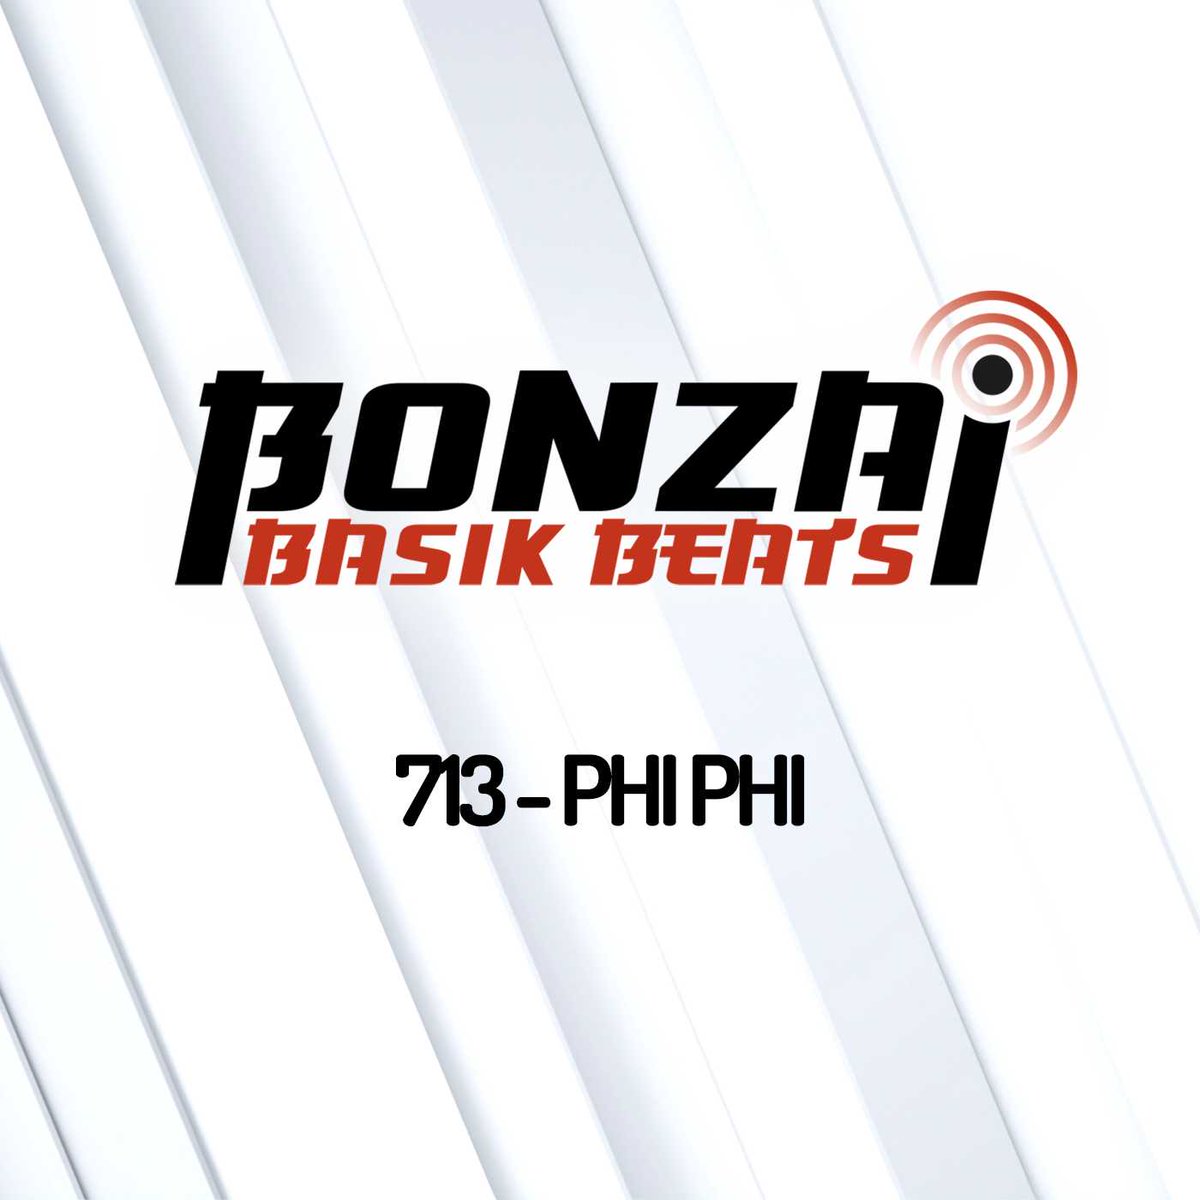 Rev up your weekend with Phi Phi at the helm of Bonzai Basik Beats, delivering a pulsating set to fuel your party spirit. Expect nothing but the finest beats and melodies from artists such as Foglight, Maze 28, Noise Generation, Production, Ewan Rill, Forty Cats, and more.